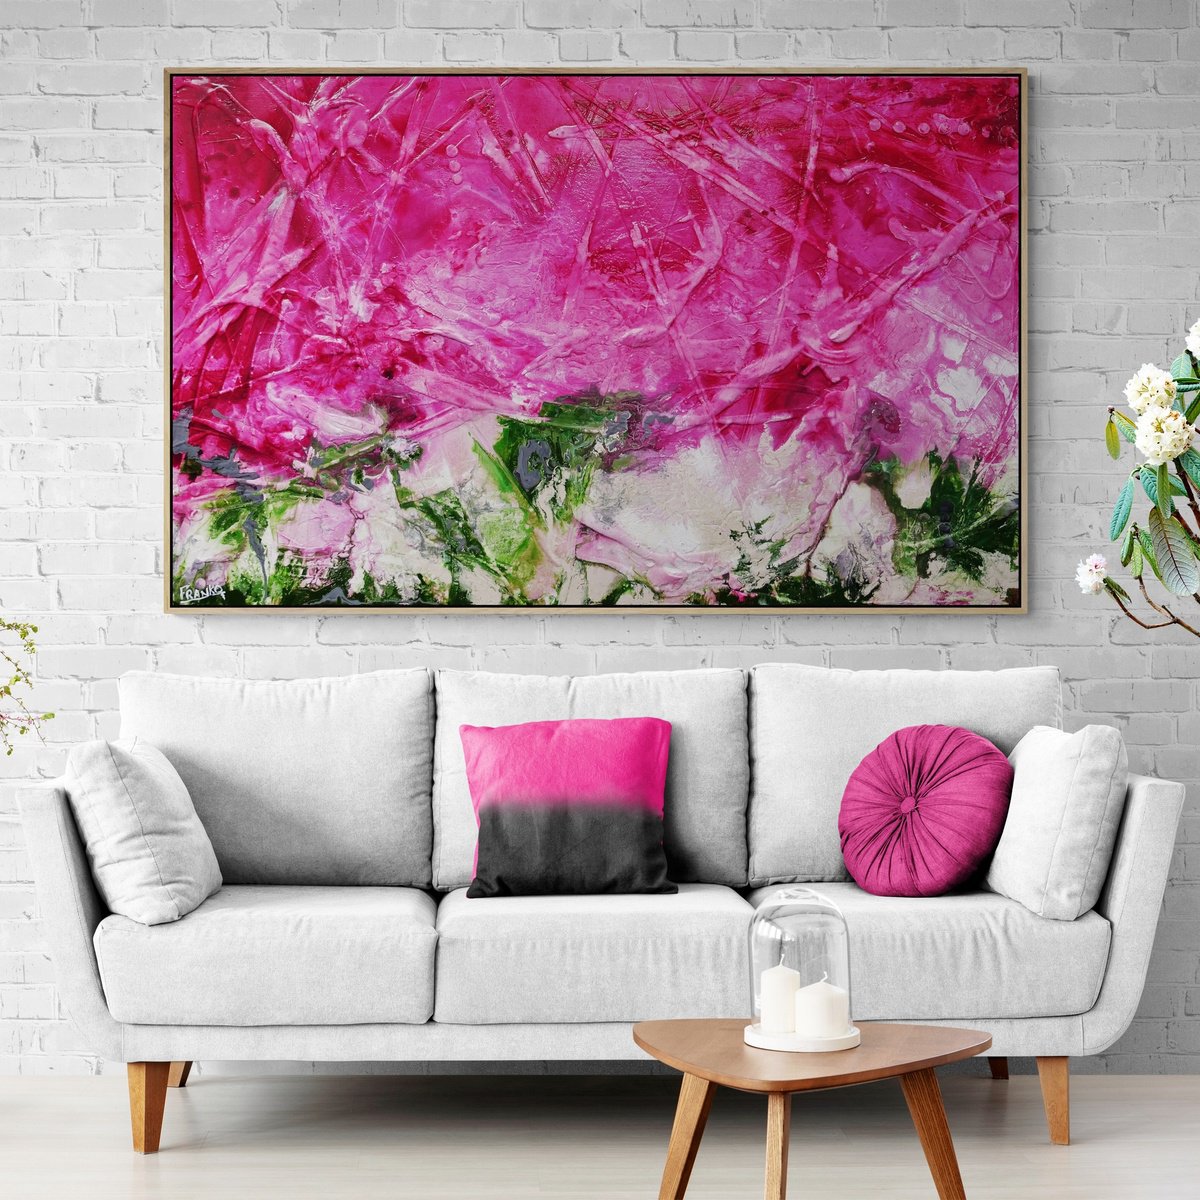 Pretty in Pink 160cm x 100cm Textured Abstract Art by Franko